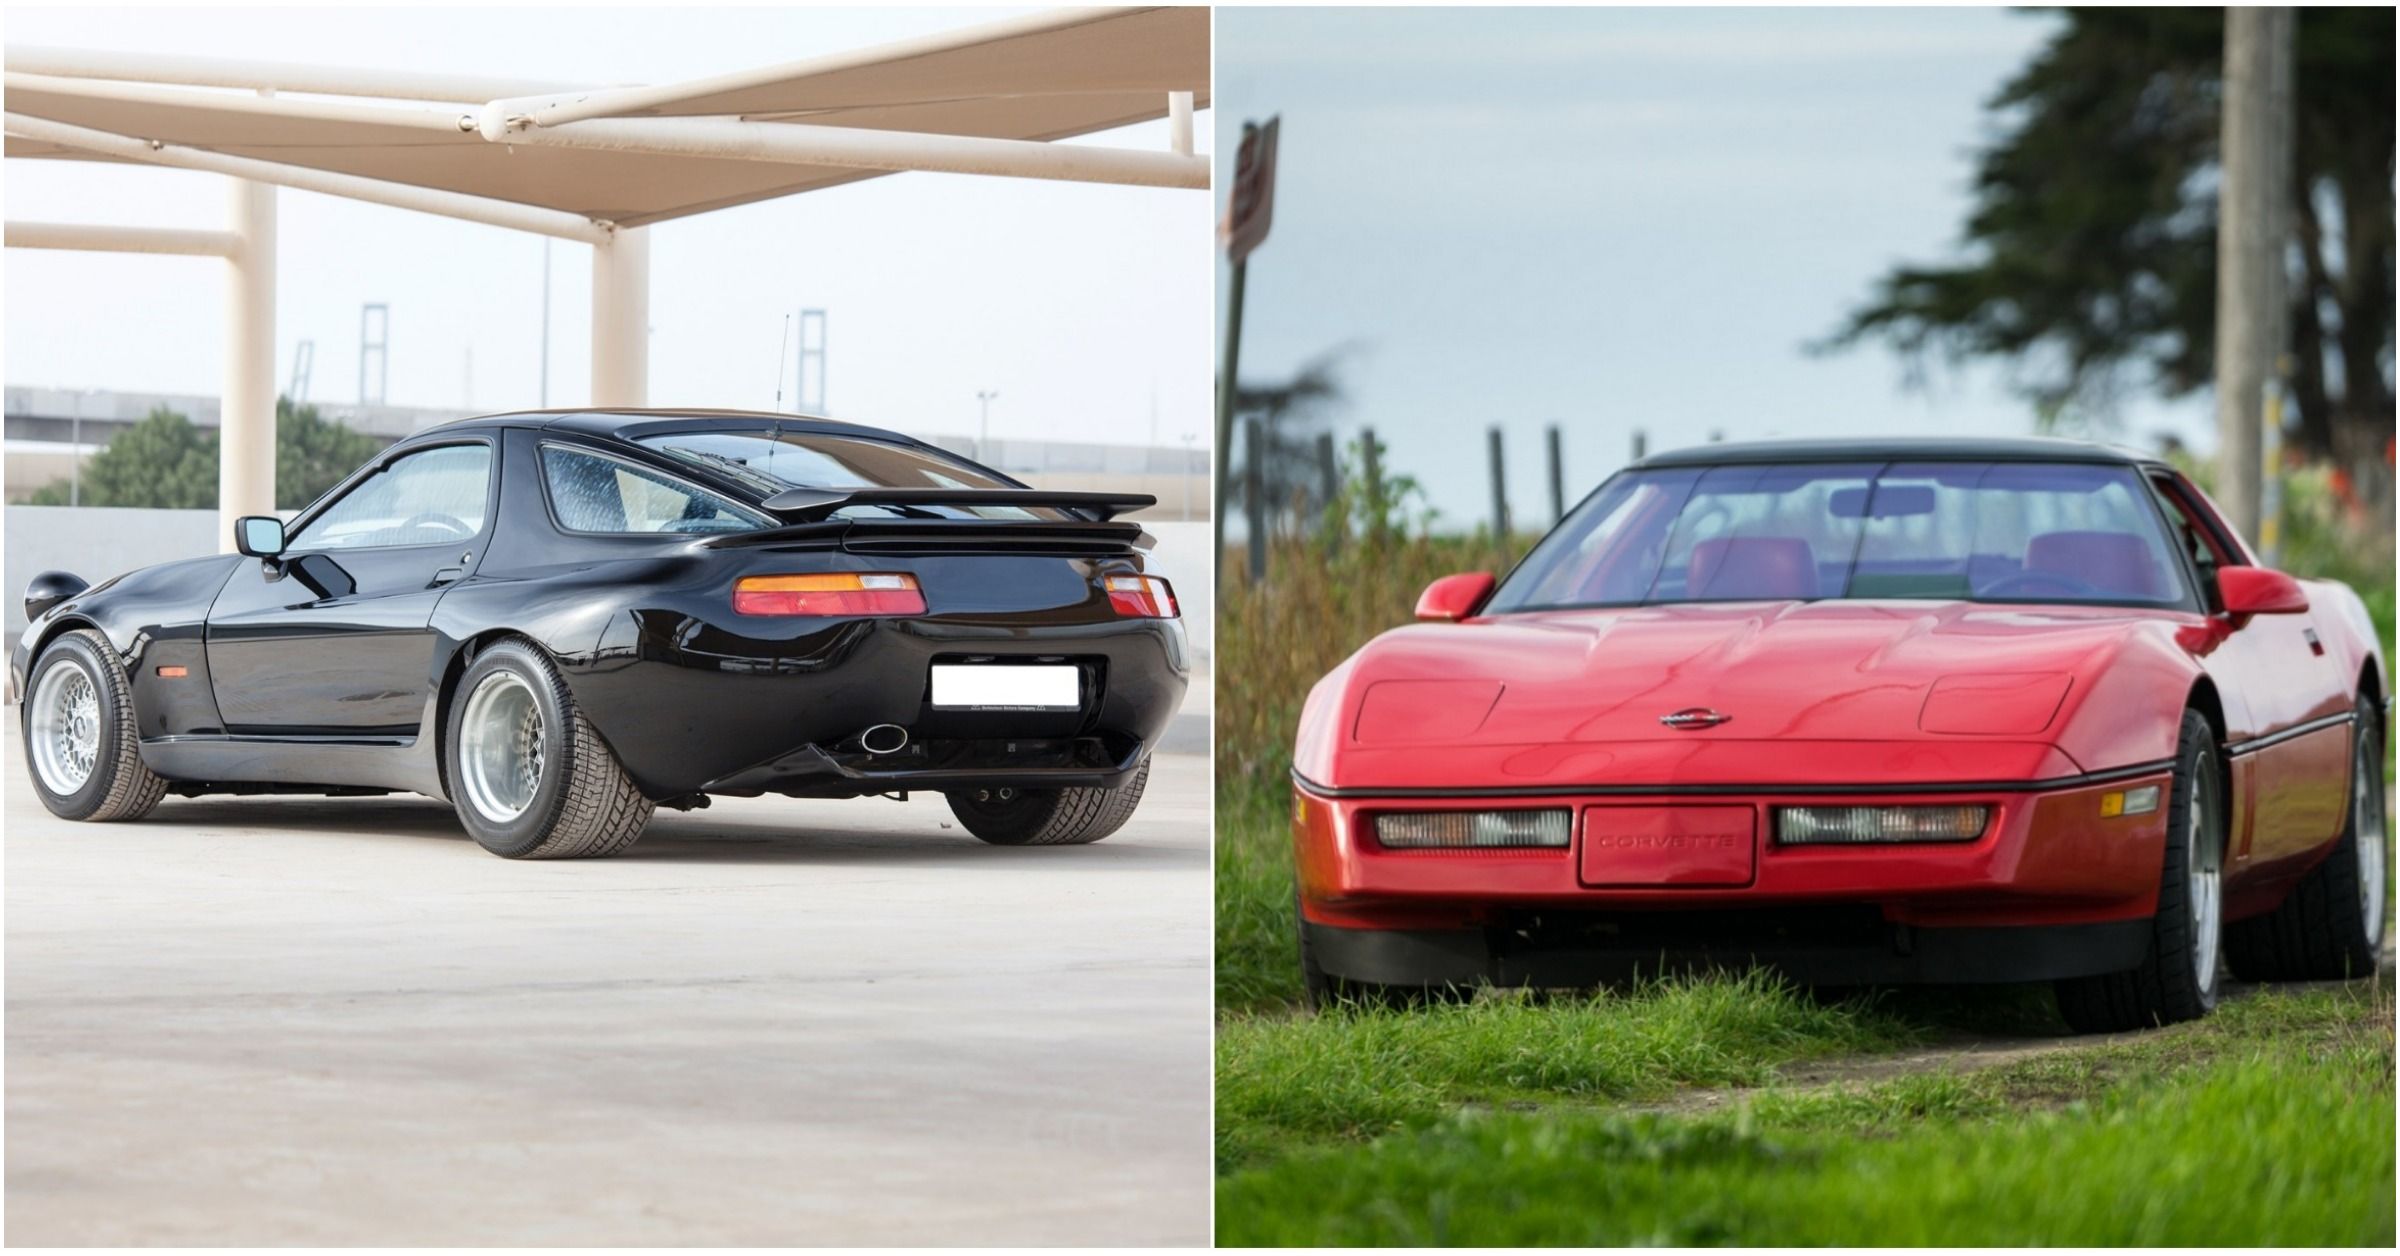 15 Classic Cars From The 1980's That You Can Still Buy For Pretty Cheap